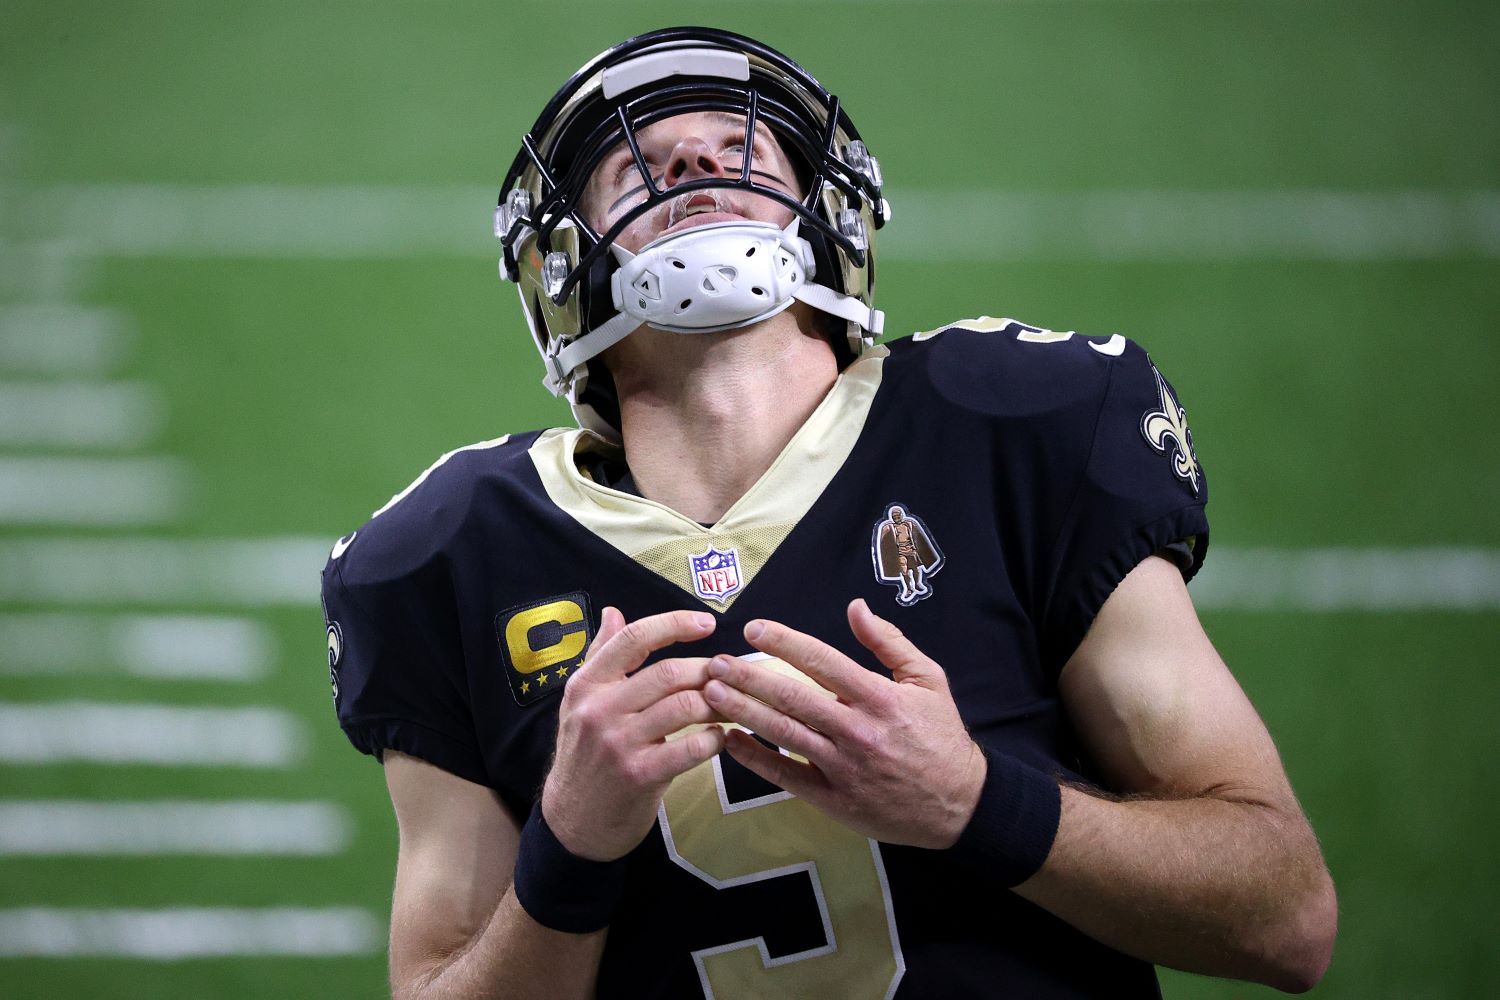 The Drew Brees injury situation doesn't look good for the Saints.